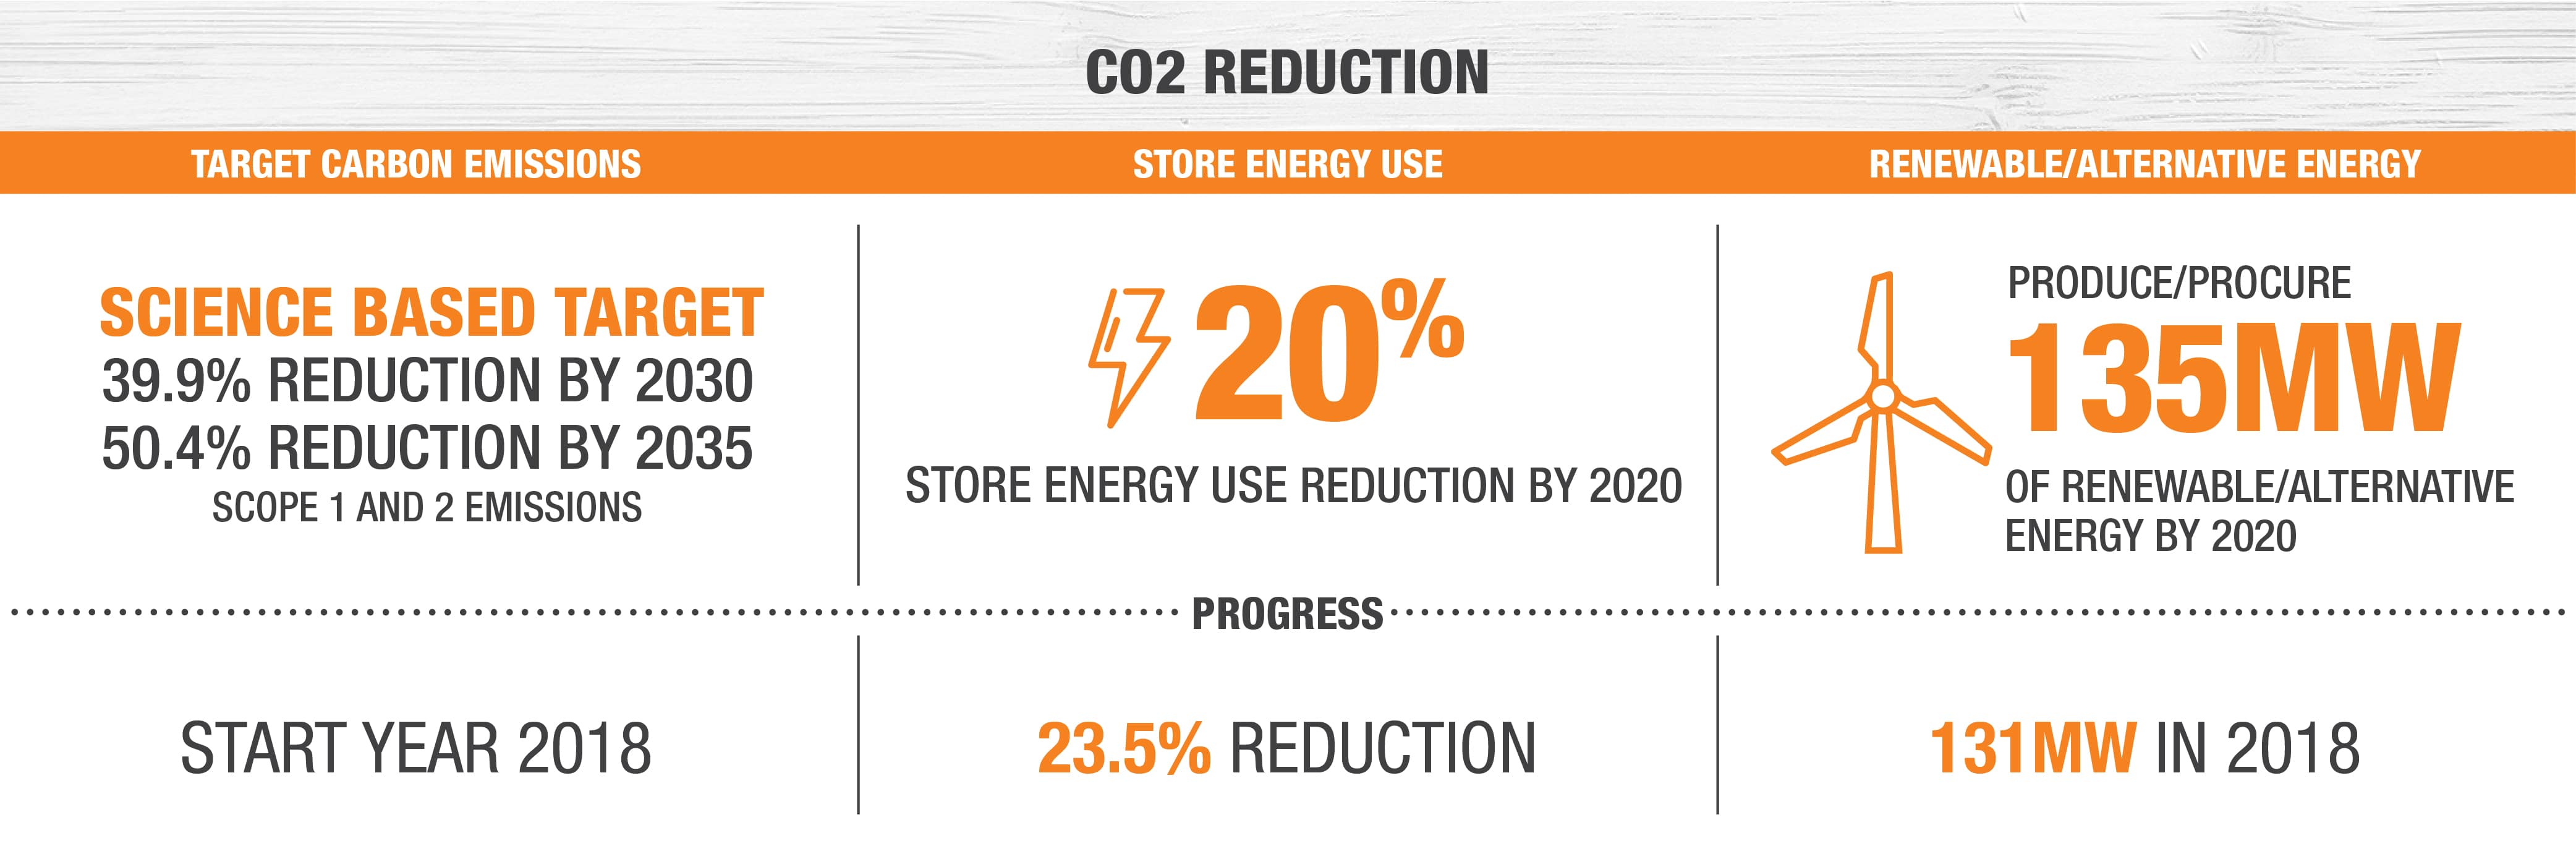 CO2 Reduction - Target Emissions: Science based target - 39.9% by 2030. Store Energy Use: 20% Store Energy Use Reduction by 2020. Renewable/Alternative Energy: Produce/Procure 135 MW of renewable energy by 2020